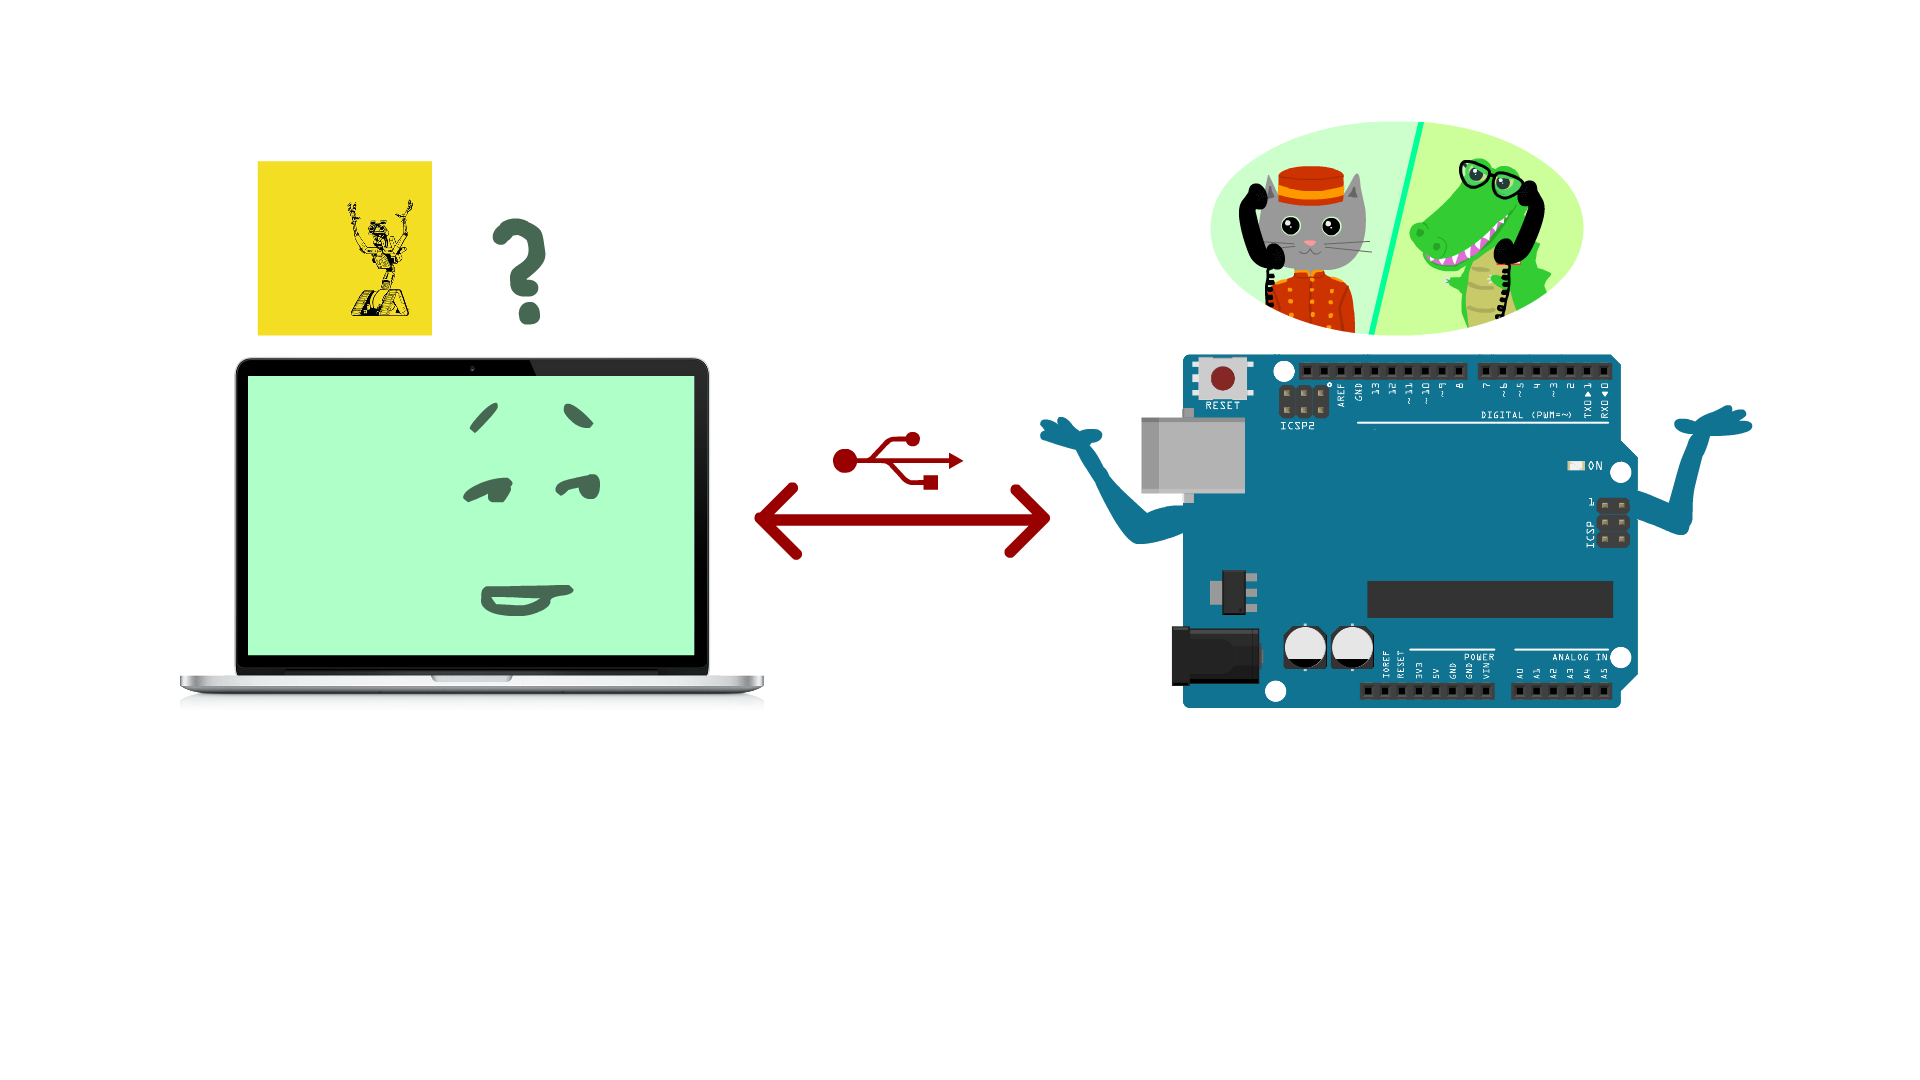 illustration of an Arduino and laptop confused about how to speak to one another. The laptop has an awkward facial expression, and the Arduino is throwing its arms up in a confused manner. The phone call between the crocodile and the cat previously is illustrated above the arduino.